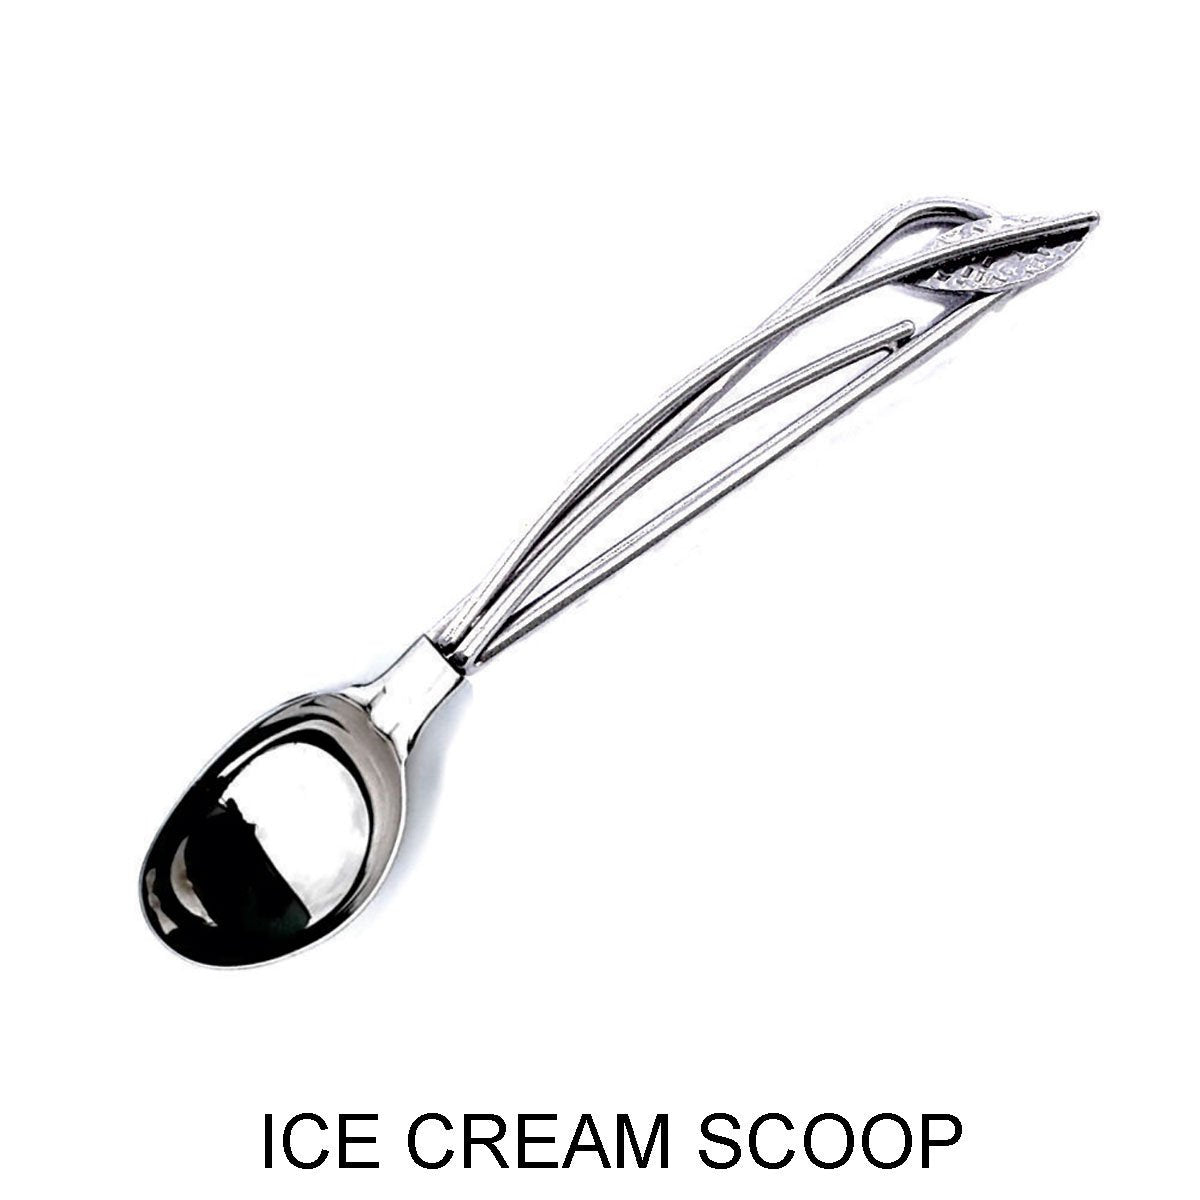 https://www.sweetheartgallery.com/cdn/shop/products/Metallic-Evolution-Stainless-Steel-Kitchen-and-Serving-Utensils-Set-Ice-Cream-Scoop-Cake-Knife-And-Pastry-Pie-Server-Artisan-Crafted-Servingware.jpg?v=1587763599